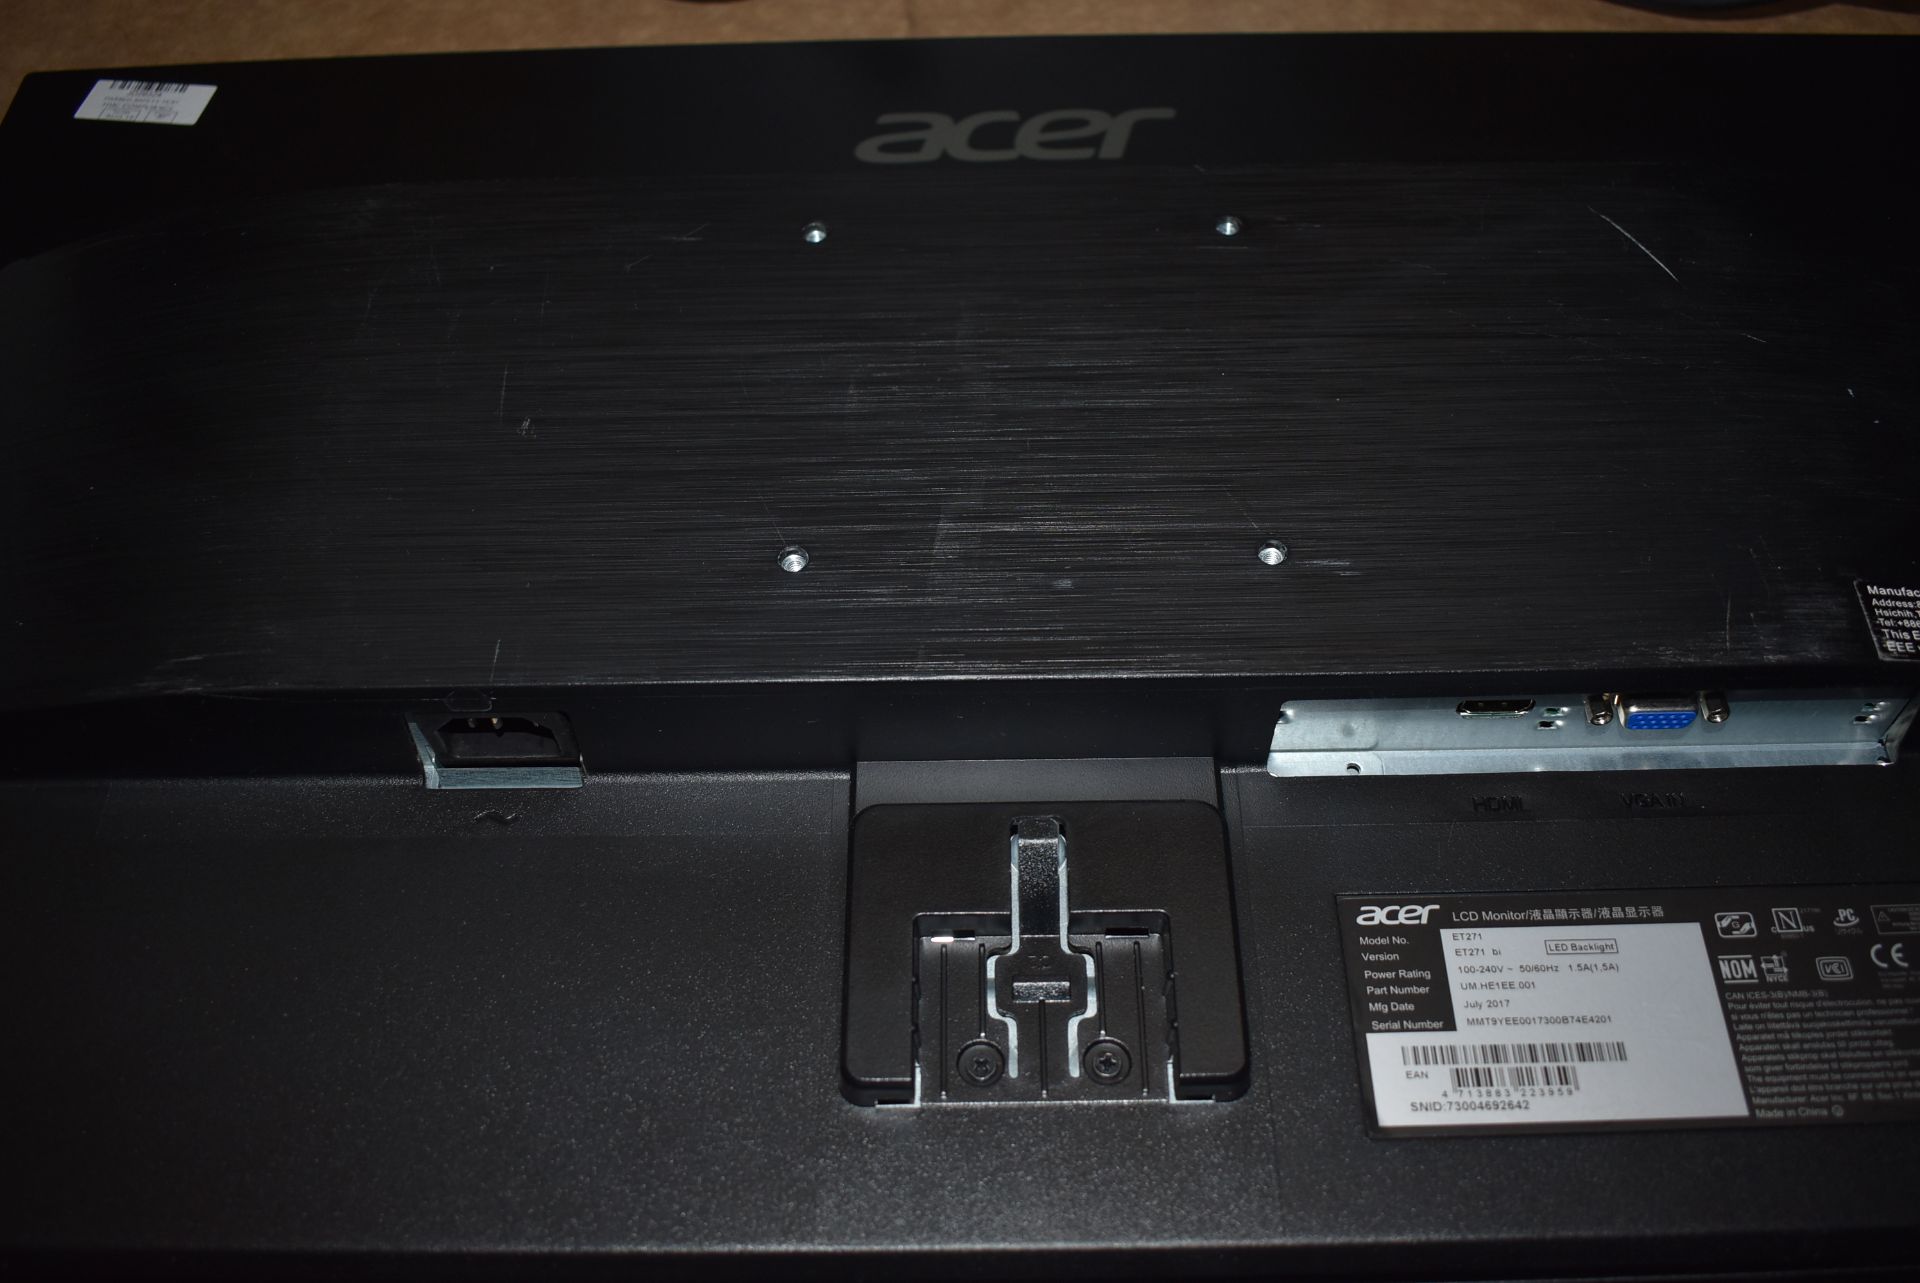 15 x Acer 27 Inch FHD Monitors - Model ET271 - Spares or Repairs With Damaged Screens - Ref: - Image 5 of 22